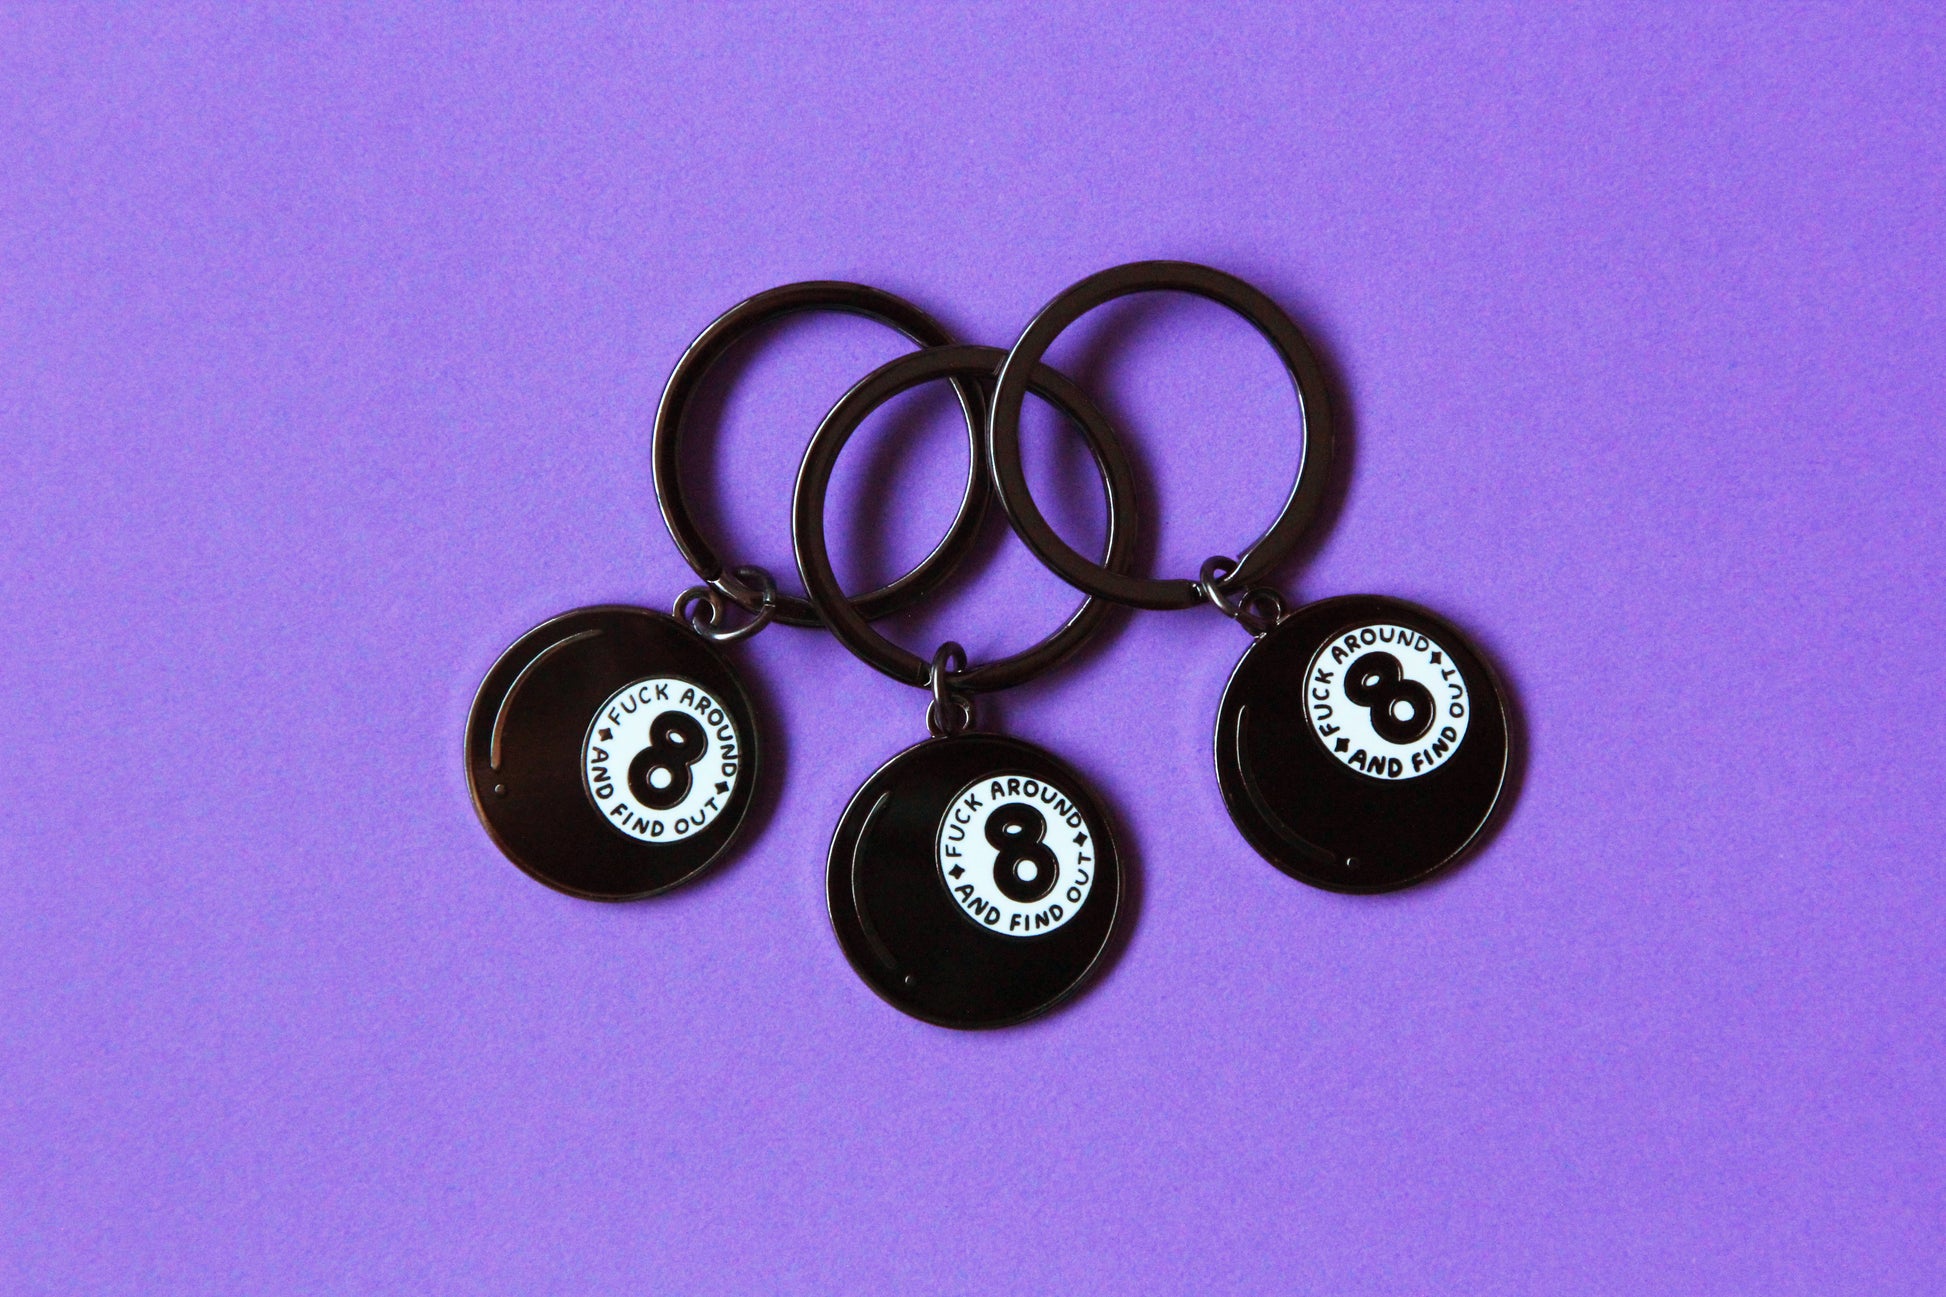 3 enamel keychains showing a magic 8 ball that says "Fuck around and find out" over a purple background.